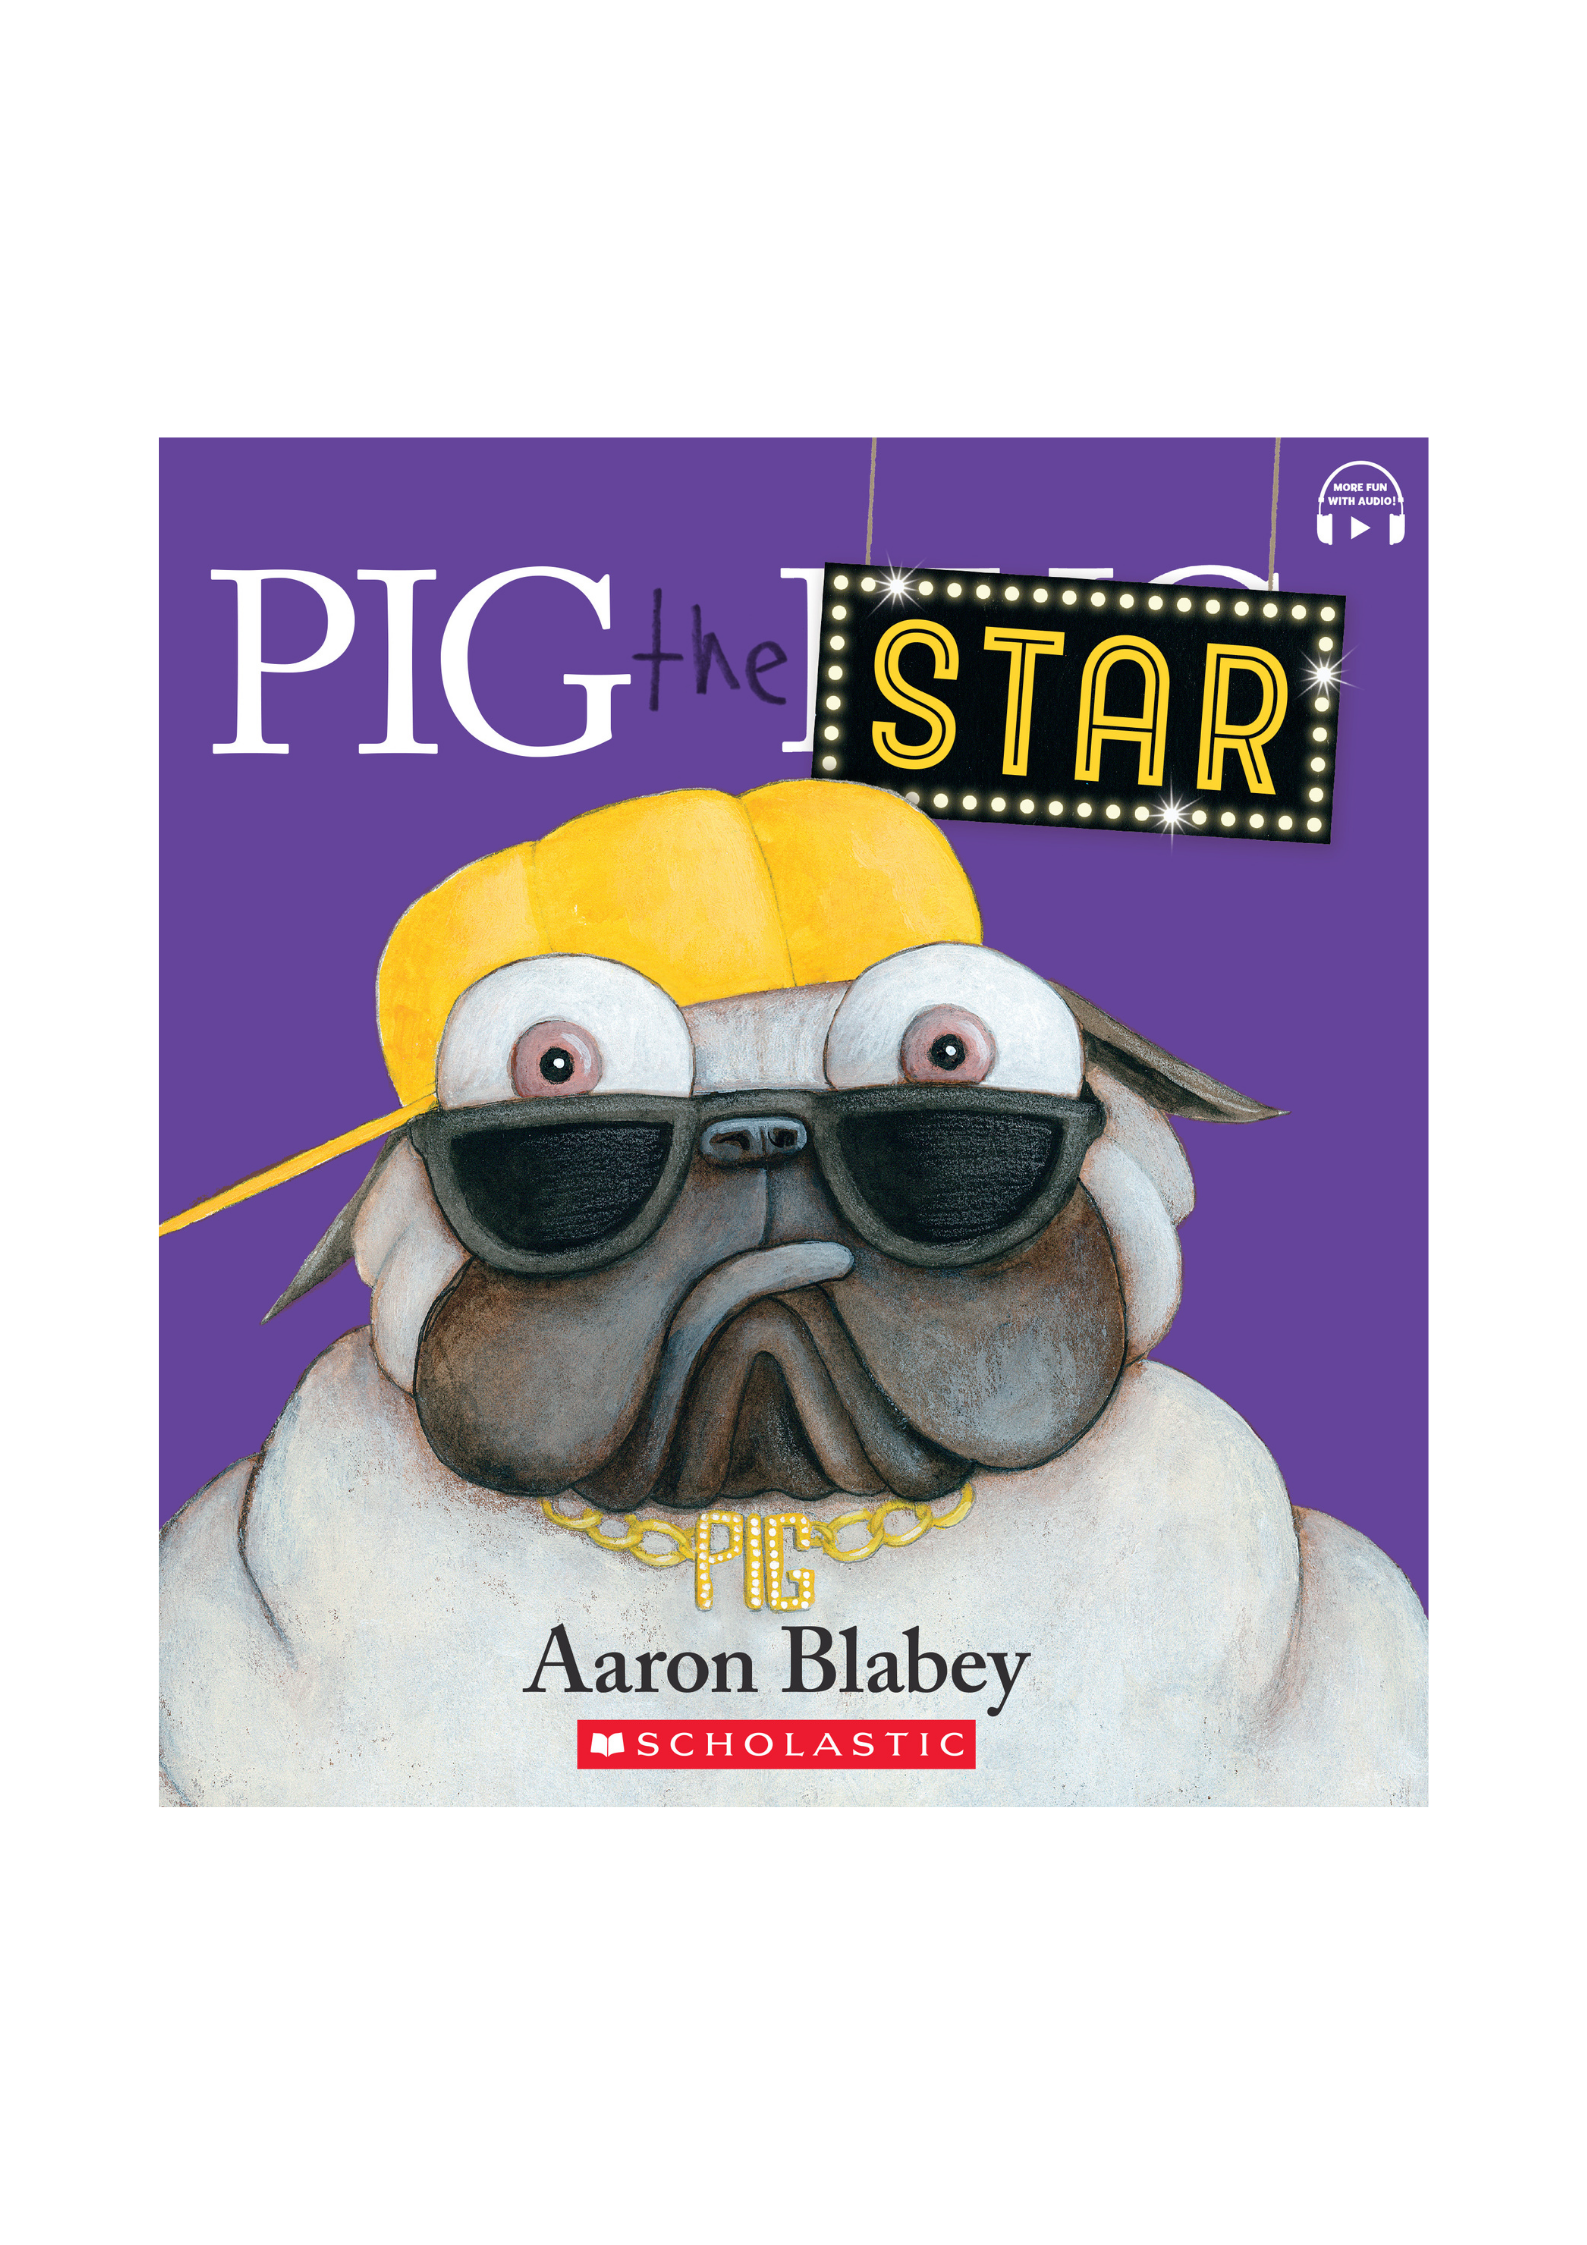 Pig the Star (Scholastic Picture Book Garden 1)